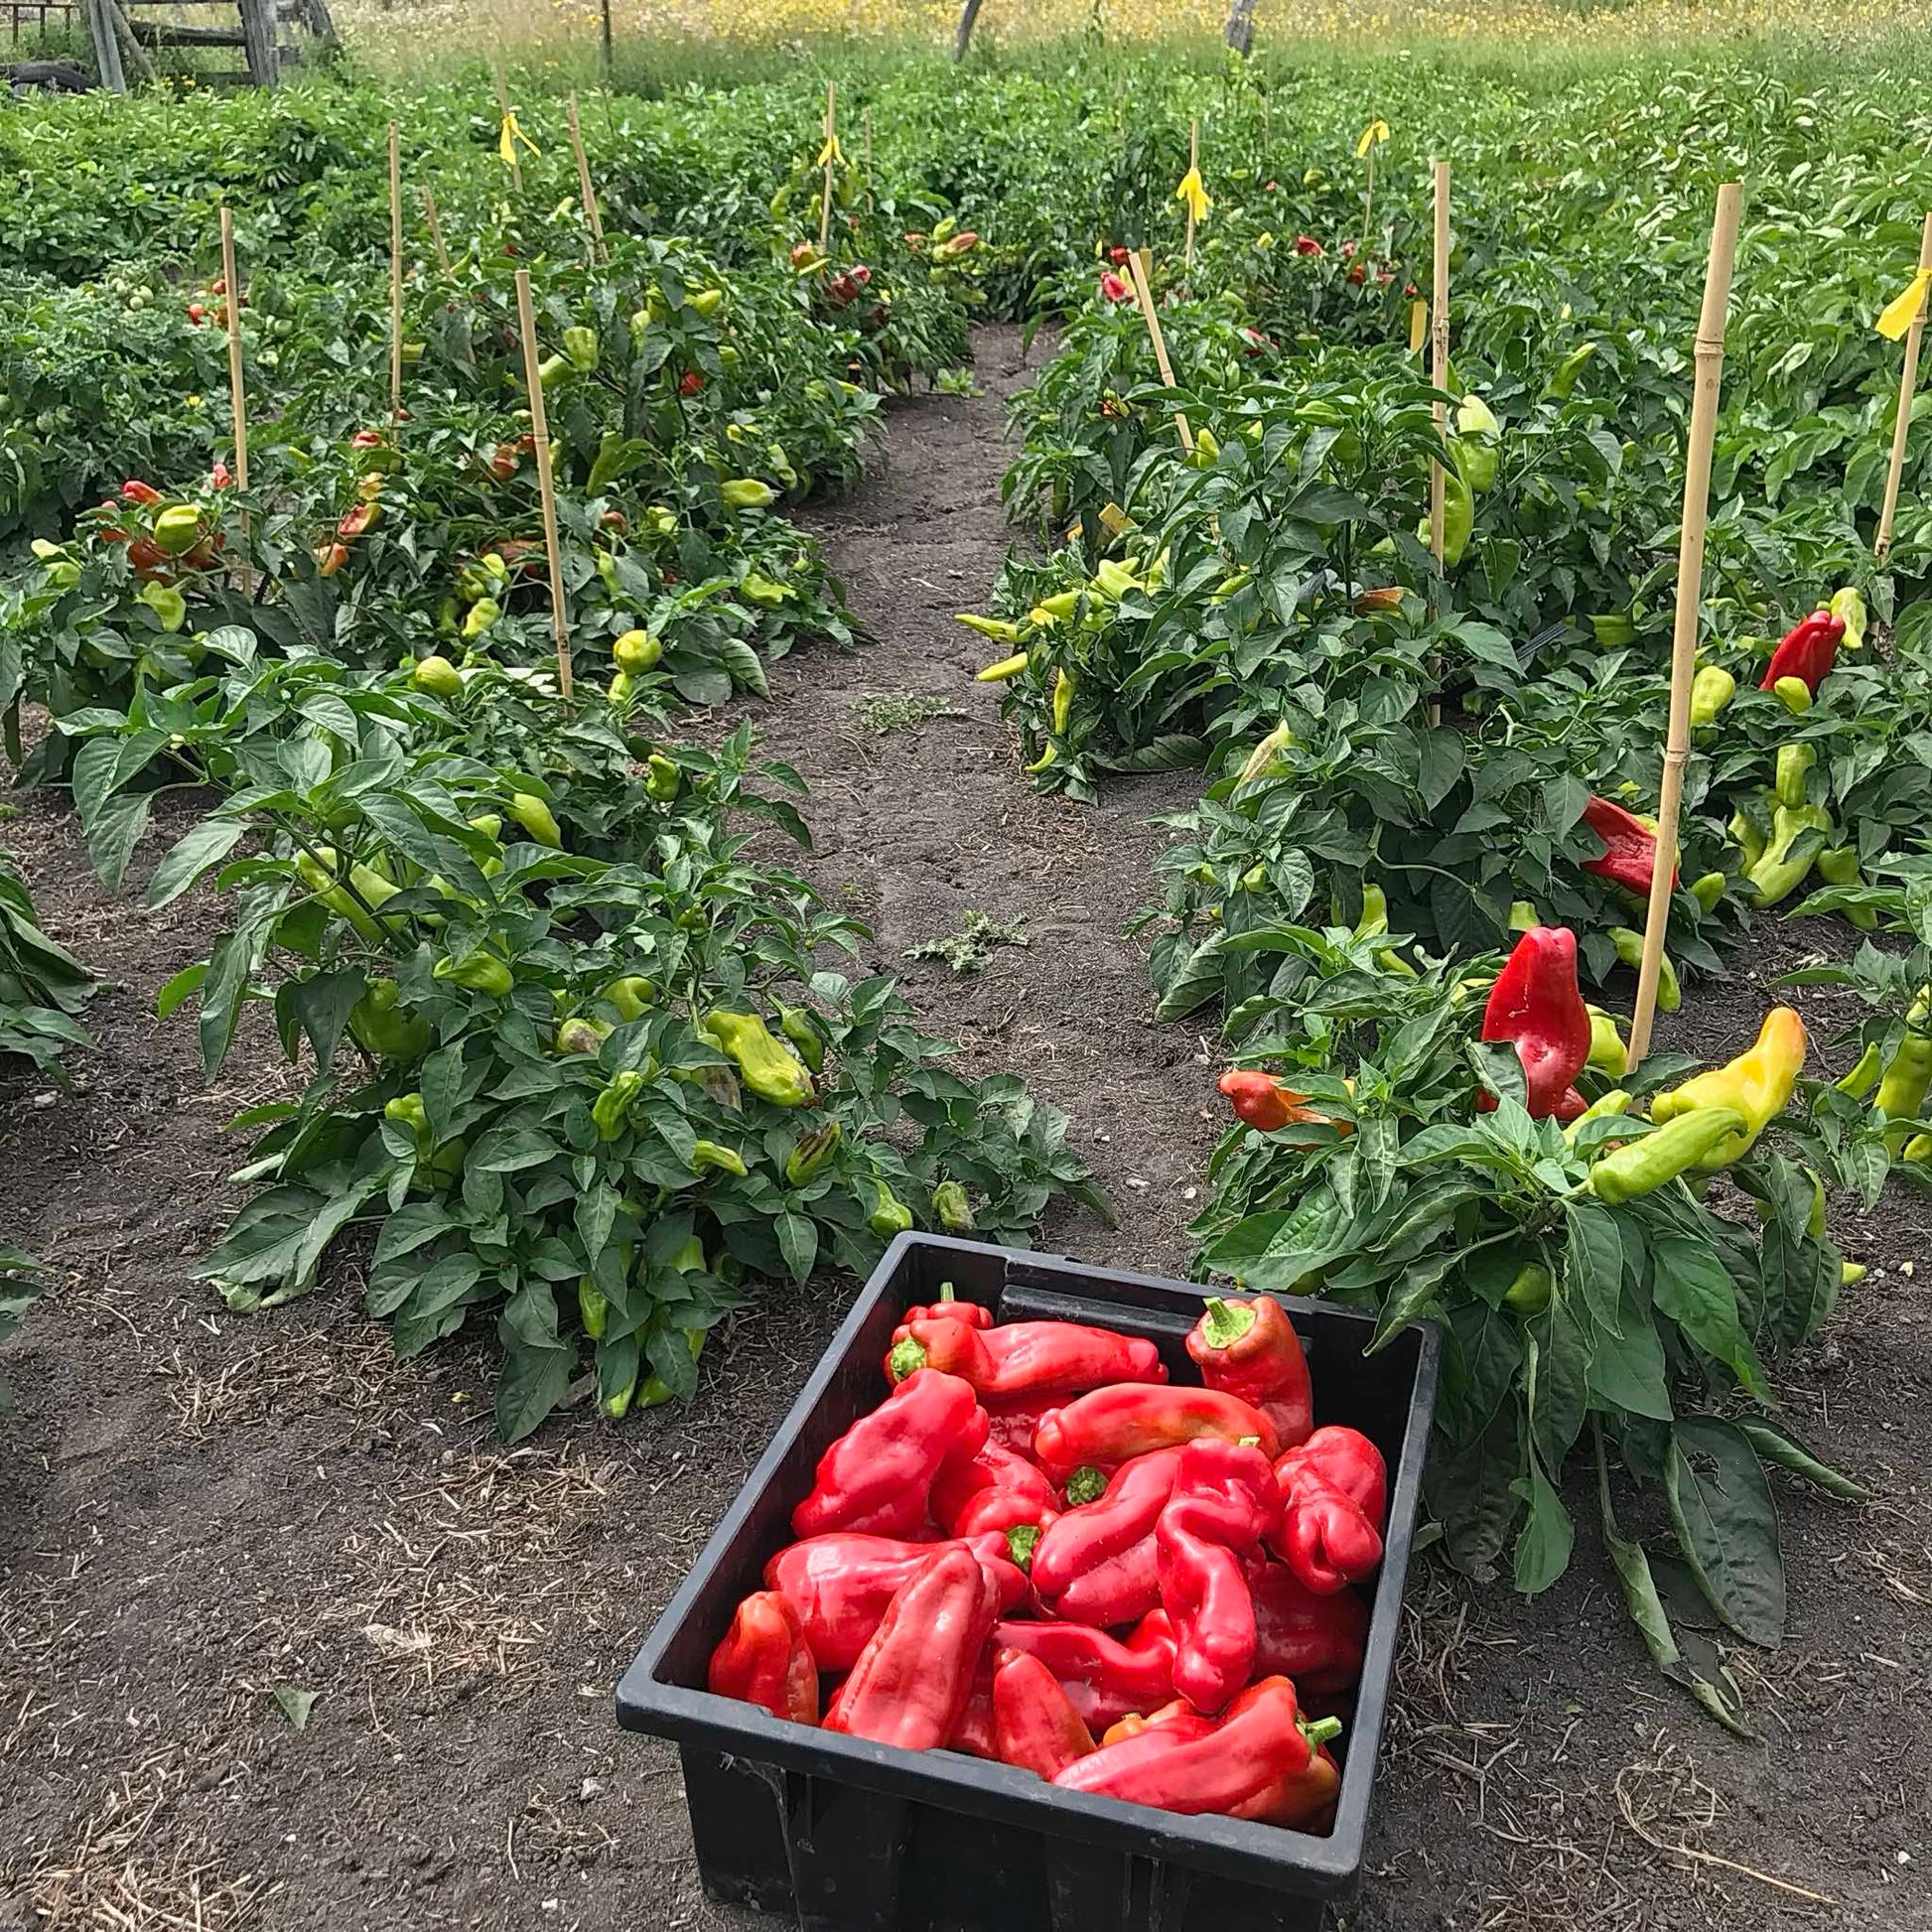 Large box of red peppers in front of plants heavily loaded with peppers.